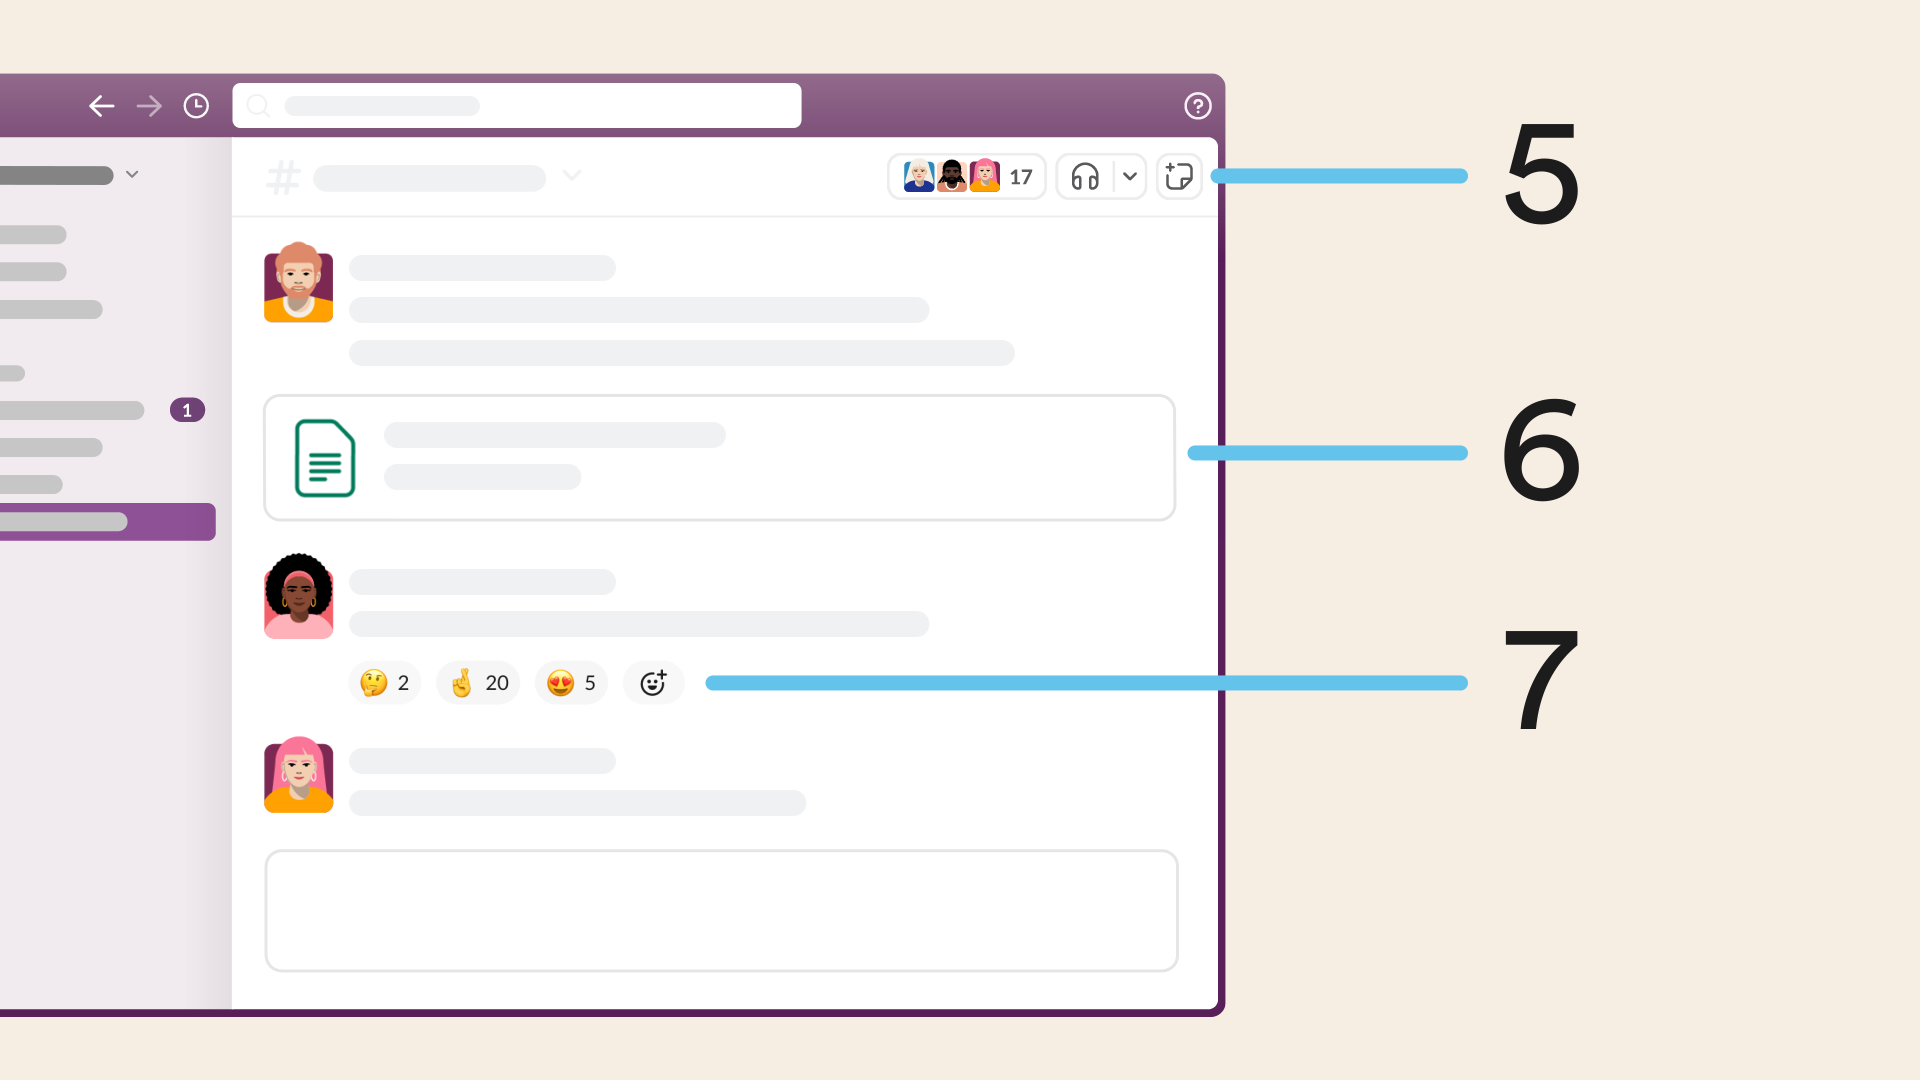 View of an example channel in Slack